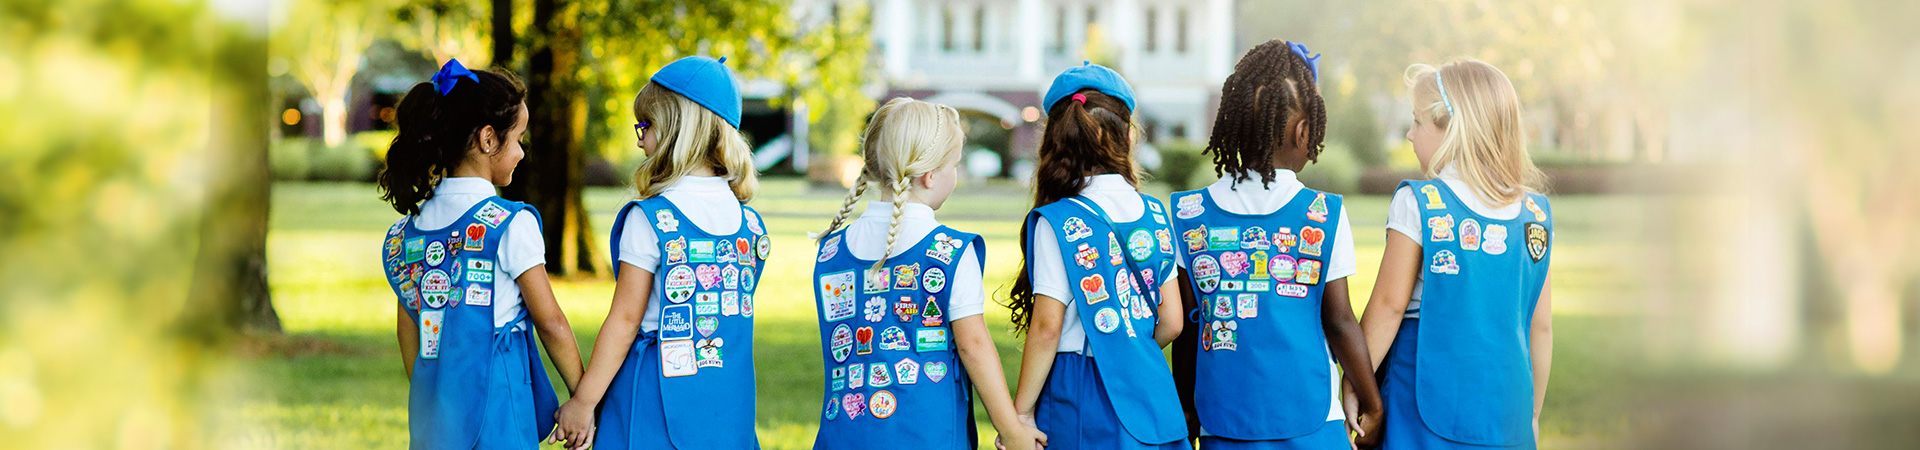  Group of Daisy Girl Scouts  holding hands outdoors 